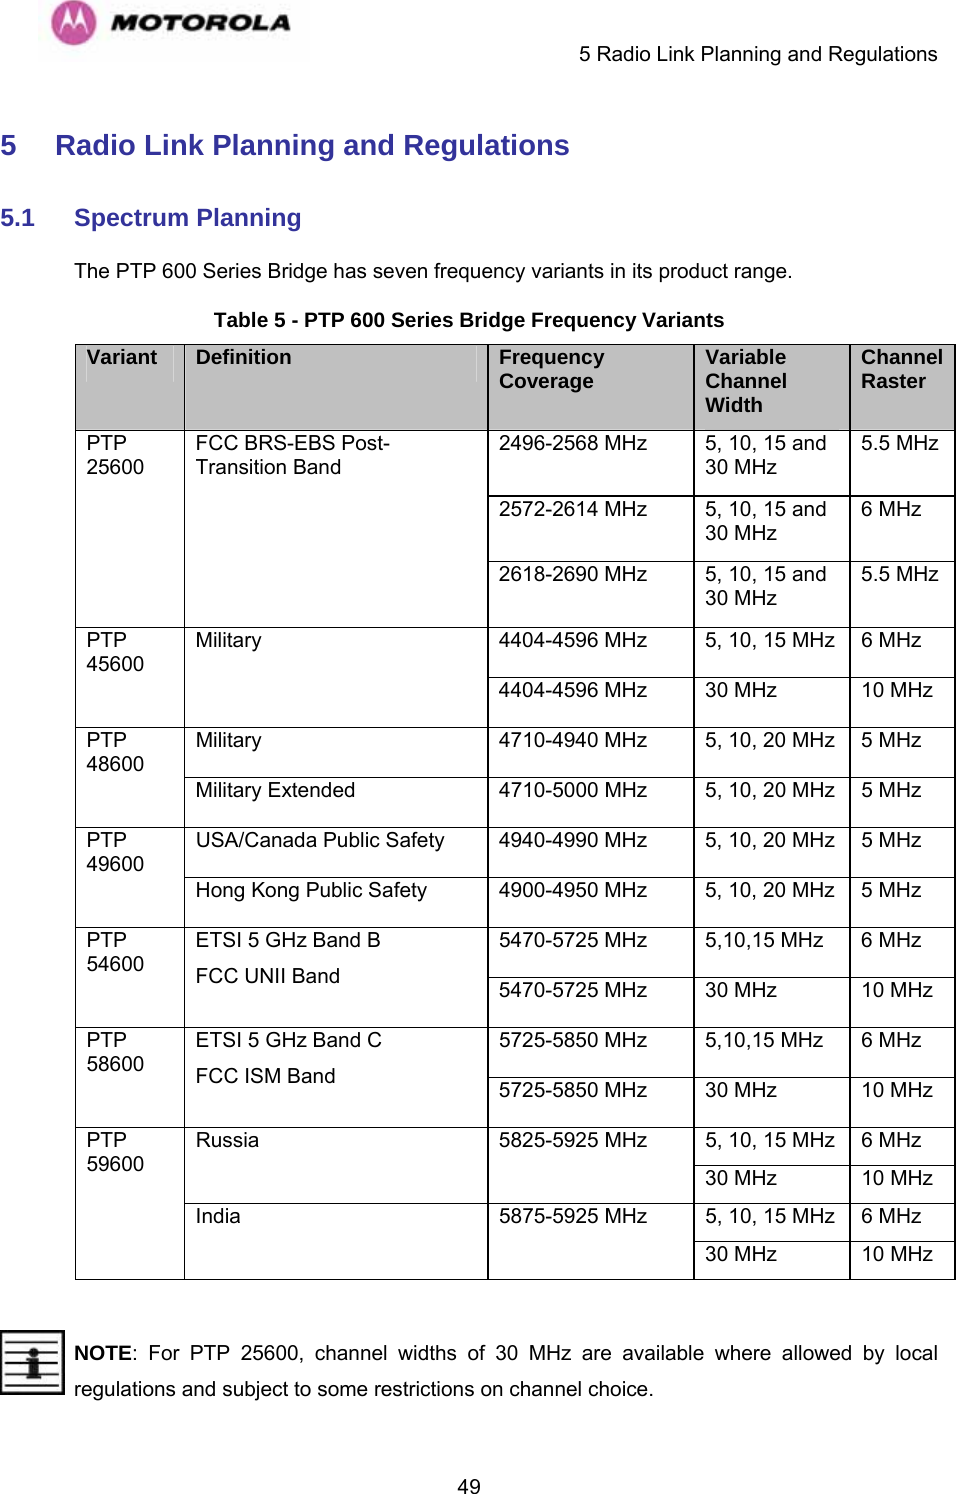     5 Radio Link Planning and Regulations  495   Radio Link Planning and Regulations  5.1  Spectrum Planning  The PTP 600 Series Bridge has seven frequency variants in its product range.  Table 5 - PTP 600 Series Bridge Frequency Variants Variant  Definition  Frequency Coverage  Variable Channel Width Channel Raster 2496-2568 MHz  5, 10, 15 and 30 MHz 5.5 MHz 2572-2614 MHz  5, 10, 15 and 30 MHz 6 MHz PTP 25600 FCC BRS-EBS Post-Transition Band 2618-2690 MHz  5, 10, 15 and 30 MHz 5.5 MHz 4404-4596 MHz  5, 10, 15 MHz  6 MHz PTP 45600 Military 4404-4596 MHz  30 MHz  10 MHz Military  4710-4940 MHz  5, 10, 20 MHz  5 MHz PTP 48600 Military Extended  4710-5000 MHz  5, 10, 20 MHz  5 MHz USA/Canada Public Safety  4940-4990 MHz  5, 10, 20 MHz  5 MHz PTP 49600 Hong Kong Public Safety  4900-4950 MHz  5, 10, 20 MHz  5 MHz 5470-5725 MHz  5,10,15 MHz   6 MHz PTP 54600 ETSI 5 GHz Band B FCC UNII Band  5470-5725 MHz  30 MHz  10 MHz 5725-5850 MHz  5,10,15 MHz  6 MHz PTP 58600 ETSI 5 GHz Band C FCC ISM Band  5725-5850 MHz  30 MHz  10 MHz 5, 10, 15 MHz  6 MHz Russia 5825-5925 MHz 30 MHz  10 MHz 5, 10, 15 MHz  6 MHz PTP 59600 India 5875-5925 MHz 30 MHz  10 MHz  NOTE: For PTP 25600, channel widths of 30 MHz are available where allowed by local regulations and subject to some restrictions on channel choice. 